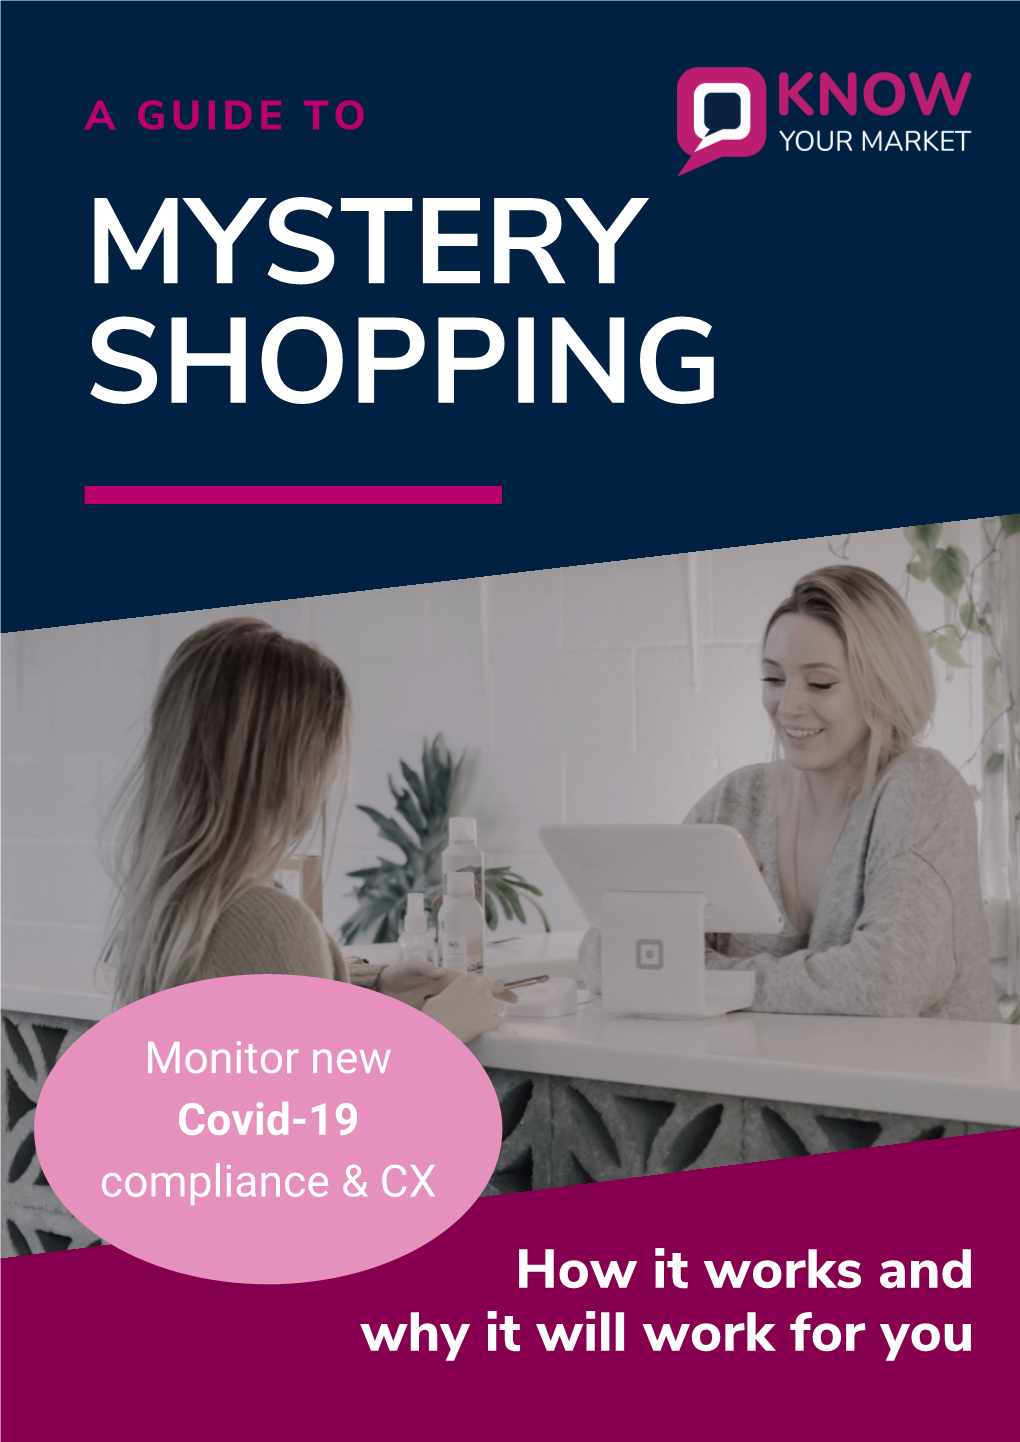 What Is Mystery Shopping?